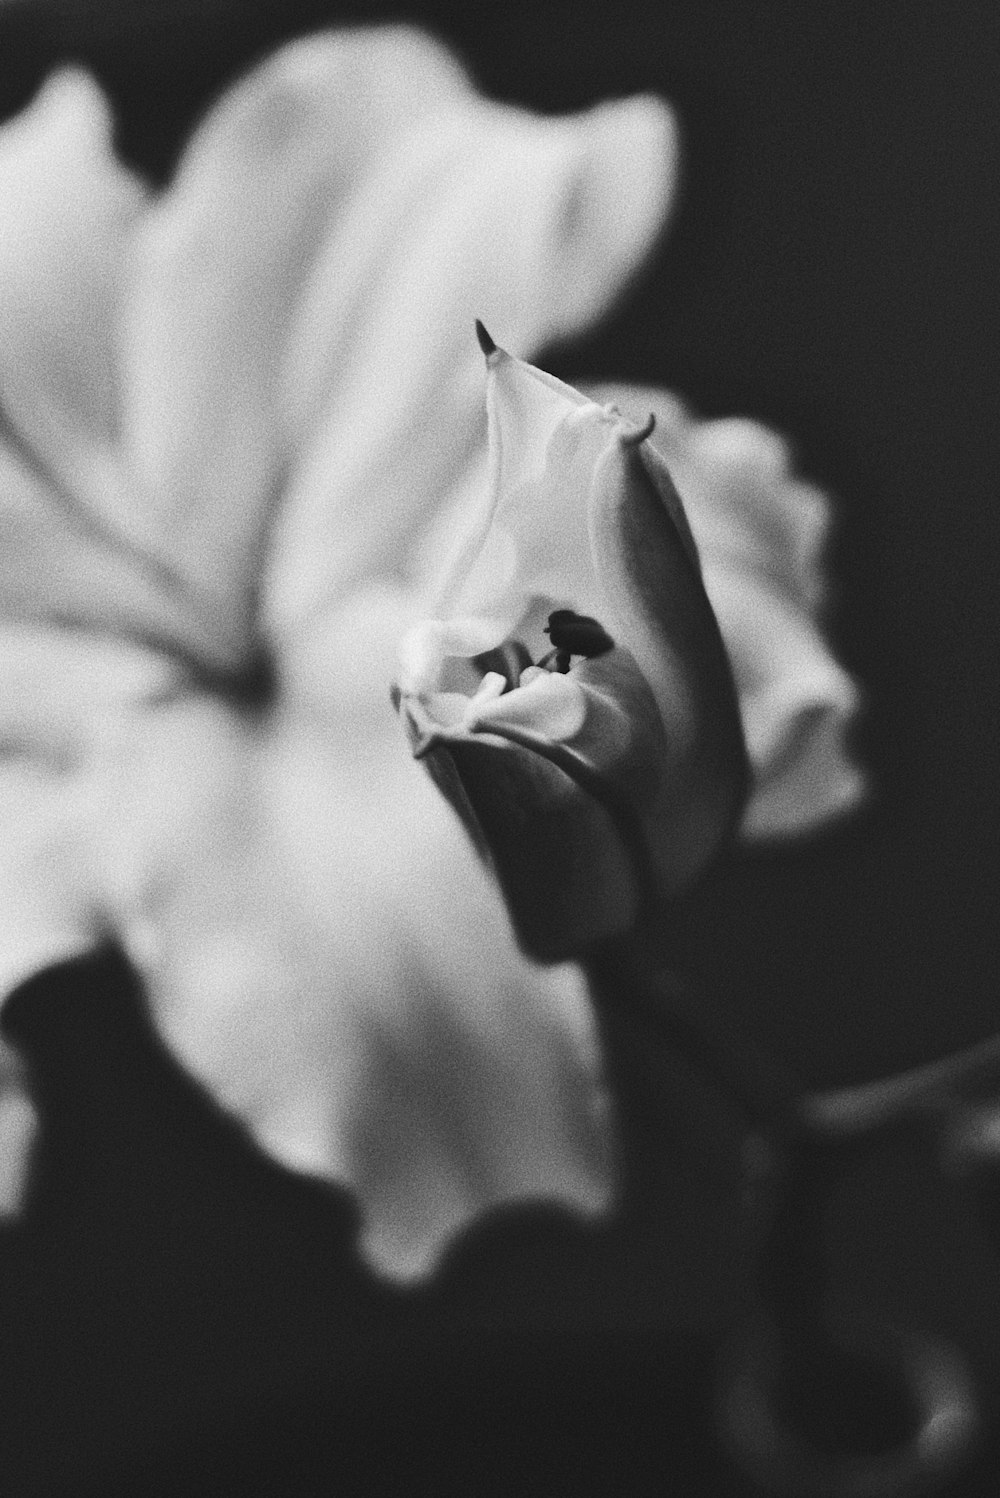 grayscale photo of flower bud